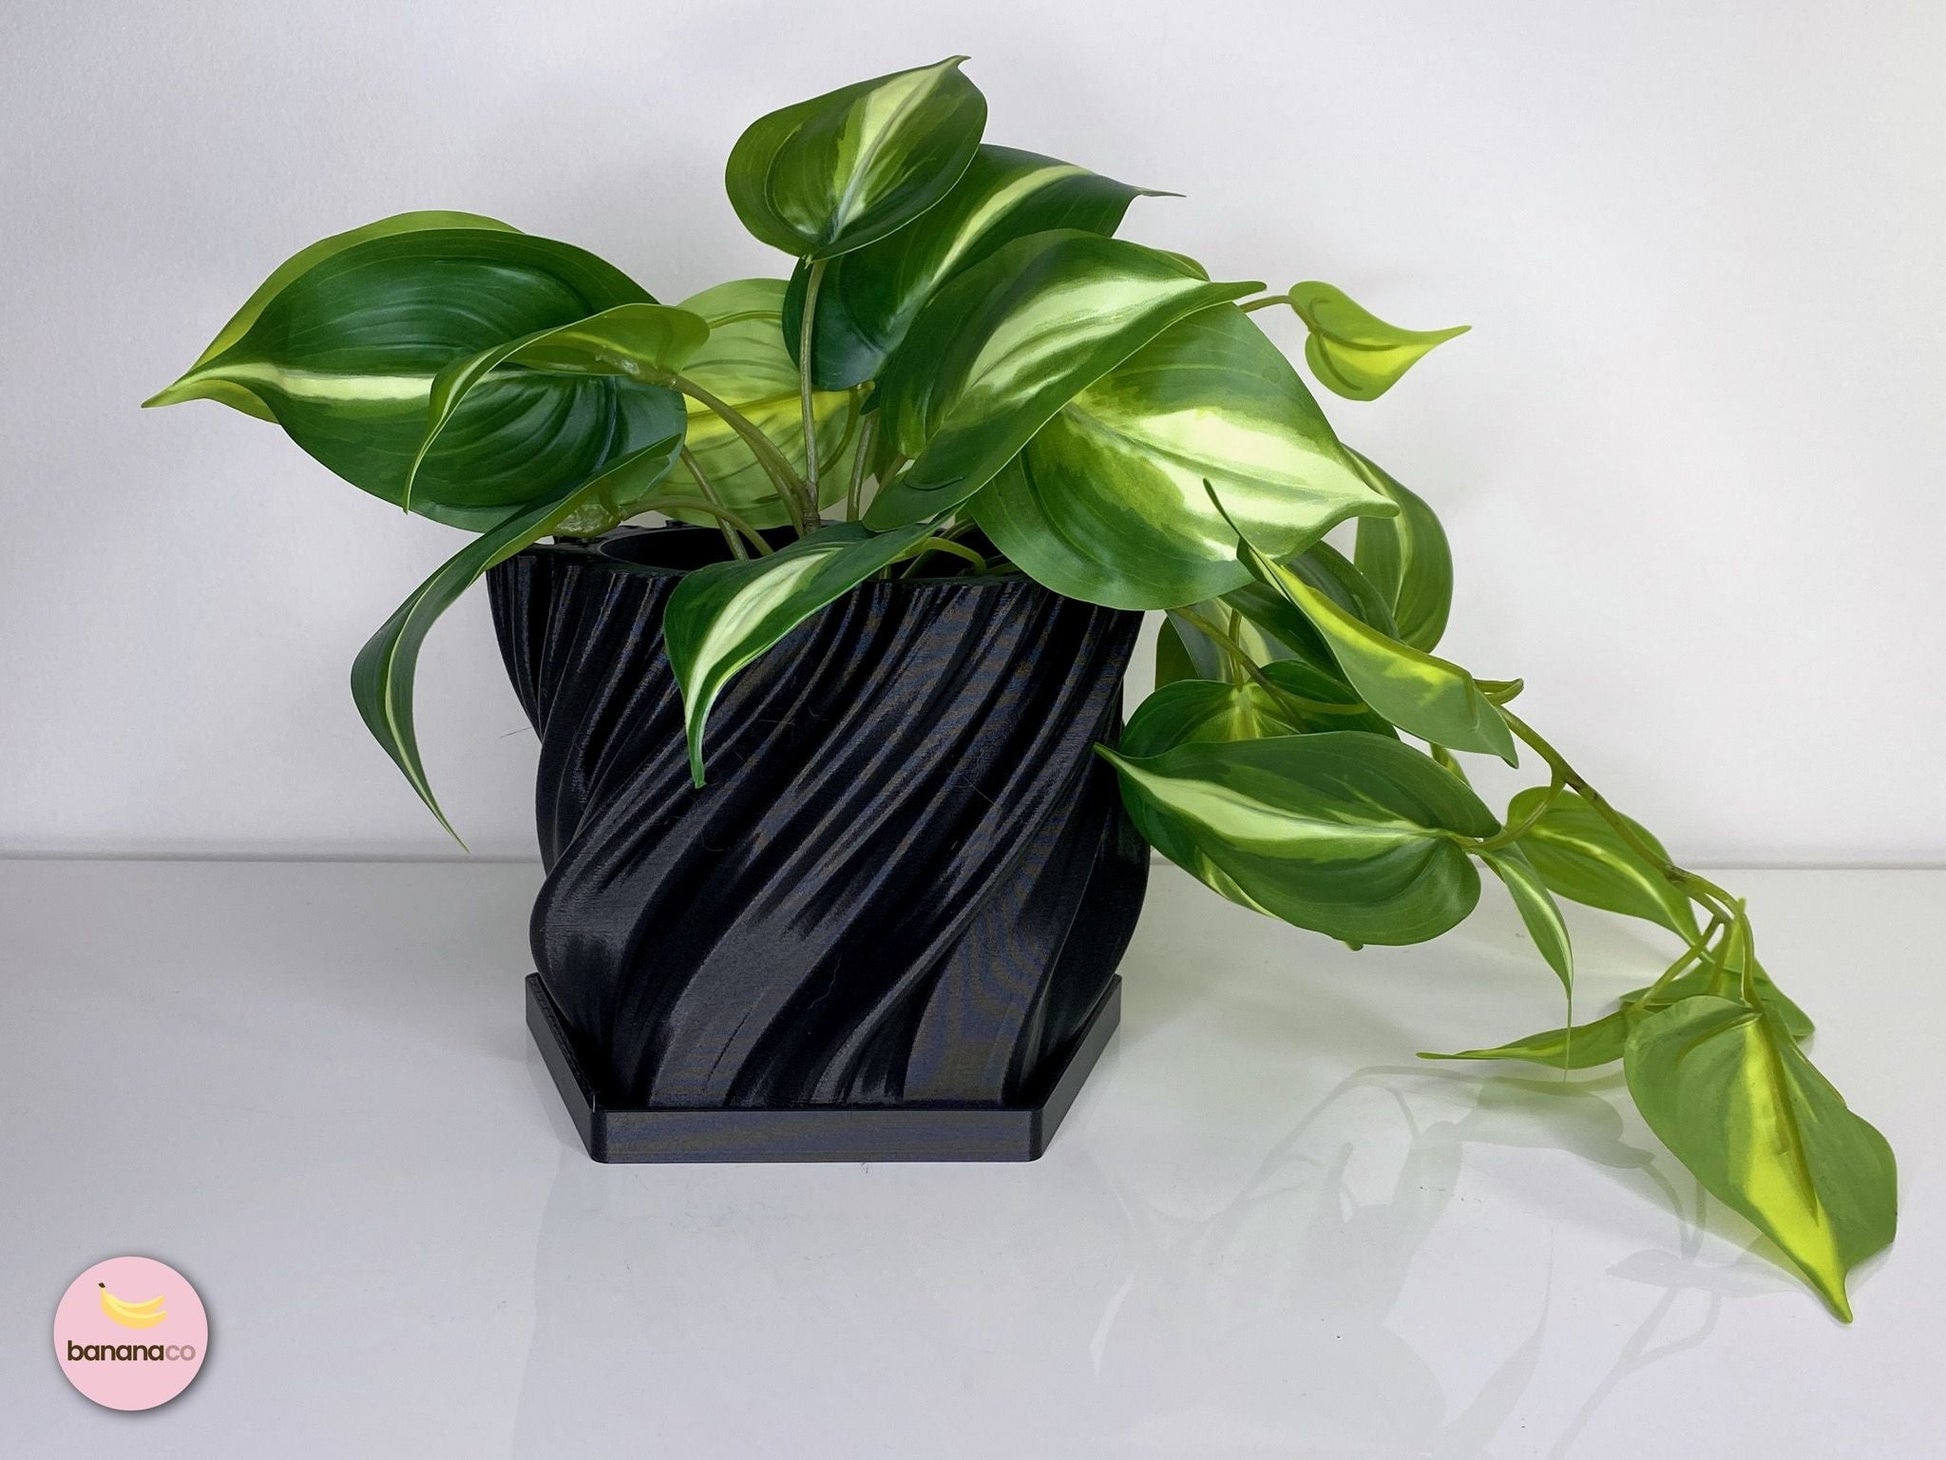 070-001 - The Bali | Planter Pot with Drainage Tray (PLANT INCLUDED WITH SMALL SIZE) - 4